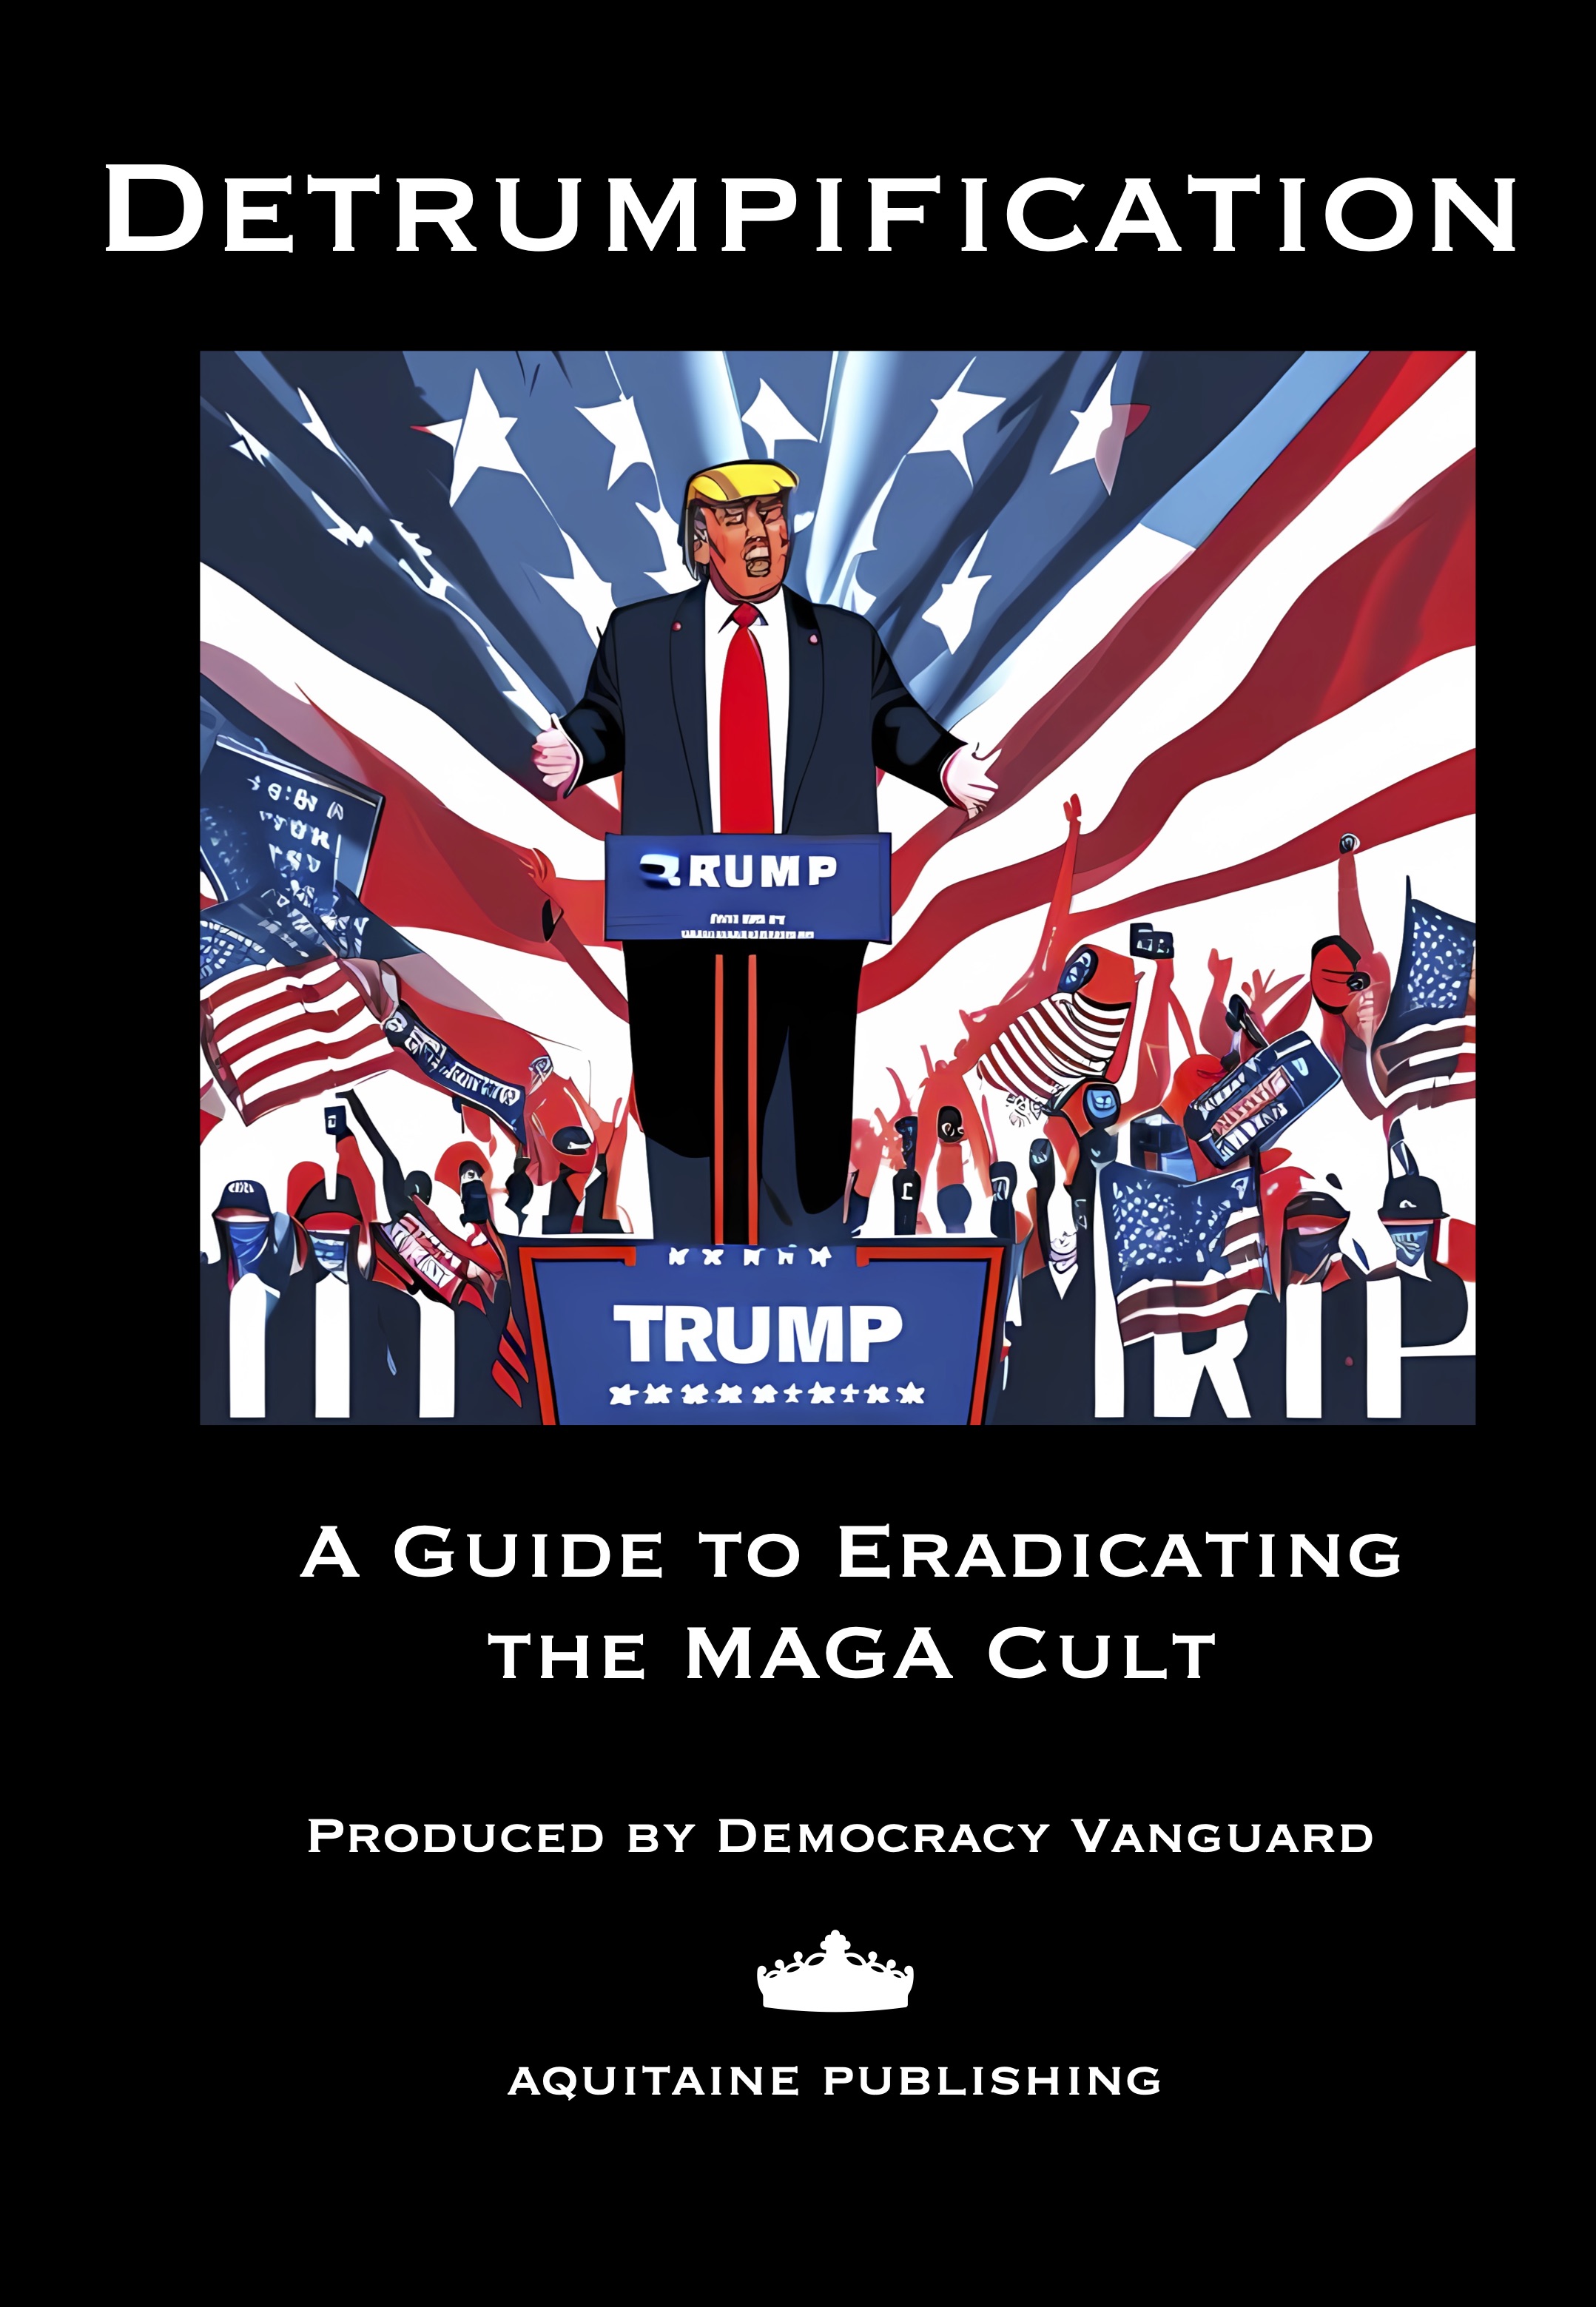 Detrumpification: A Guide to Eradicate the MAGA Cult